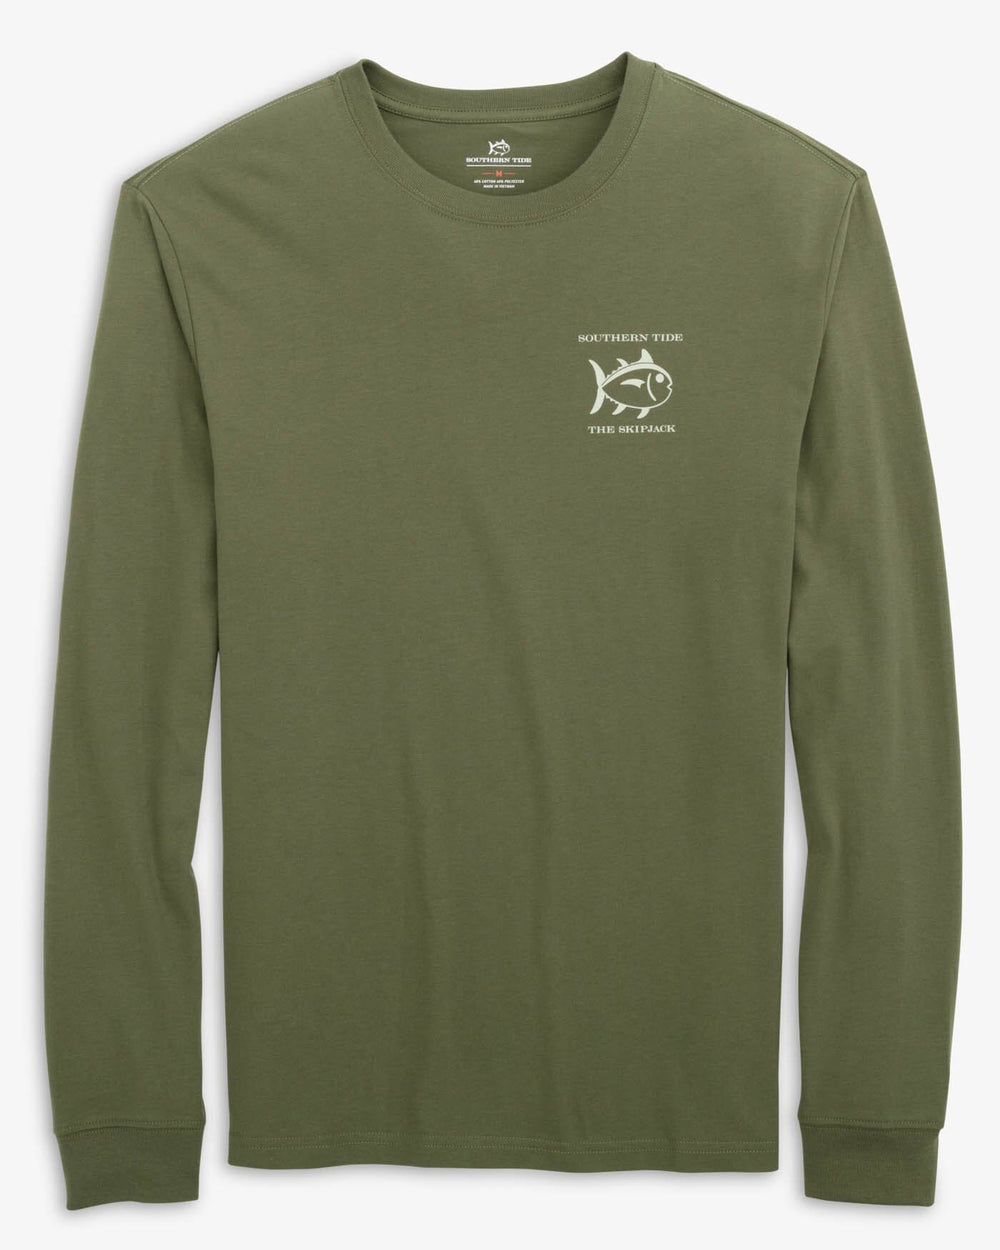 The front view of the Southern Tide Livin Lodge Skipjack Fill Long Sleeve T-Shirt by Southern Tide - Salton Sea Green